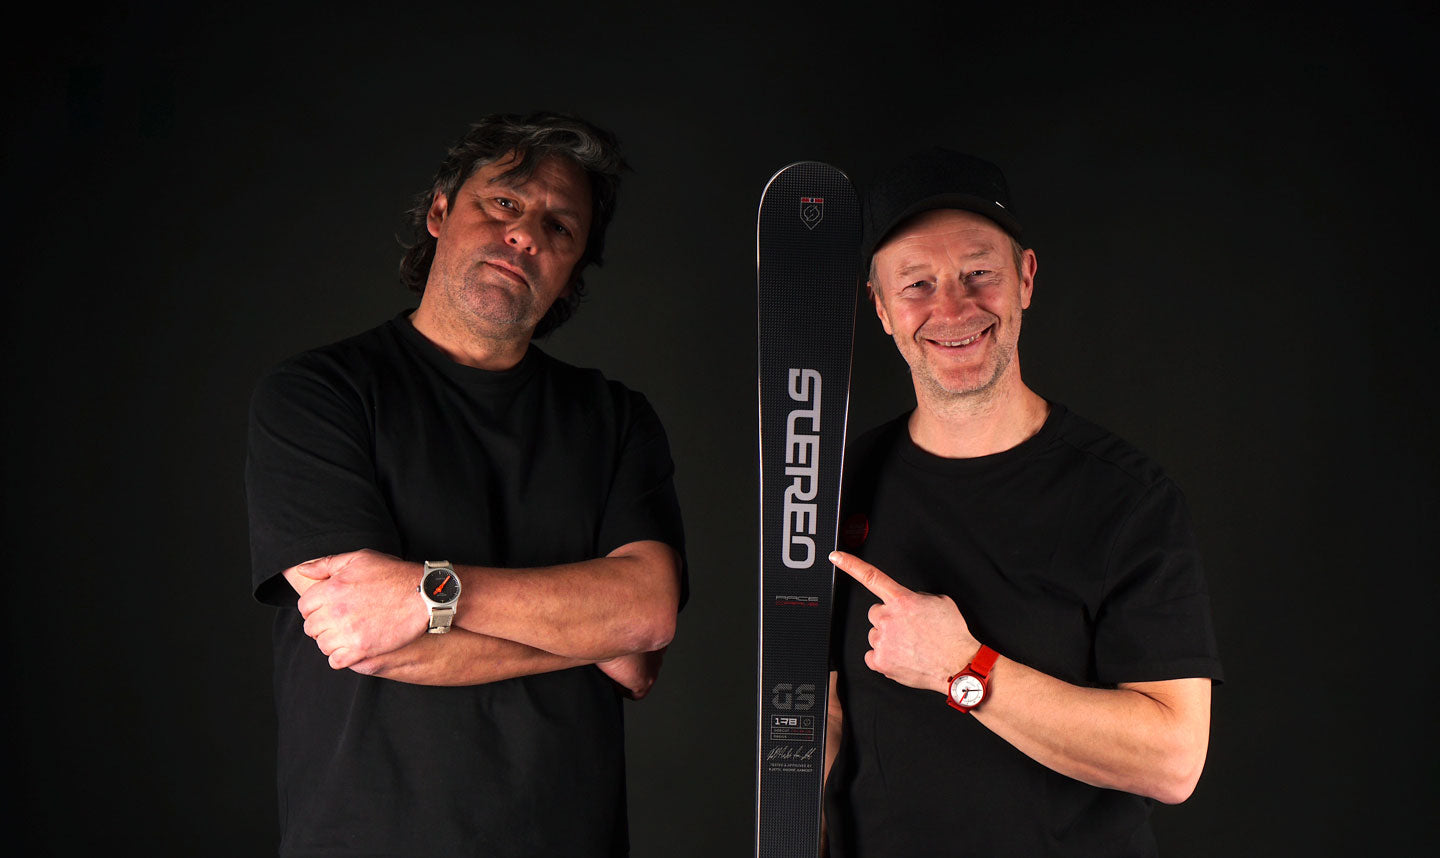 ALL-NORWEGIAN COLLABORATION FOR OLYMPIC MEDALS ON NORWEGIAN SKIS